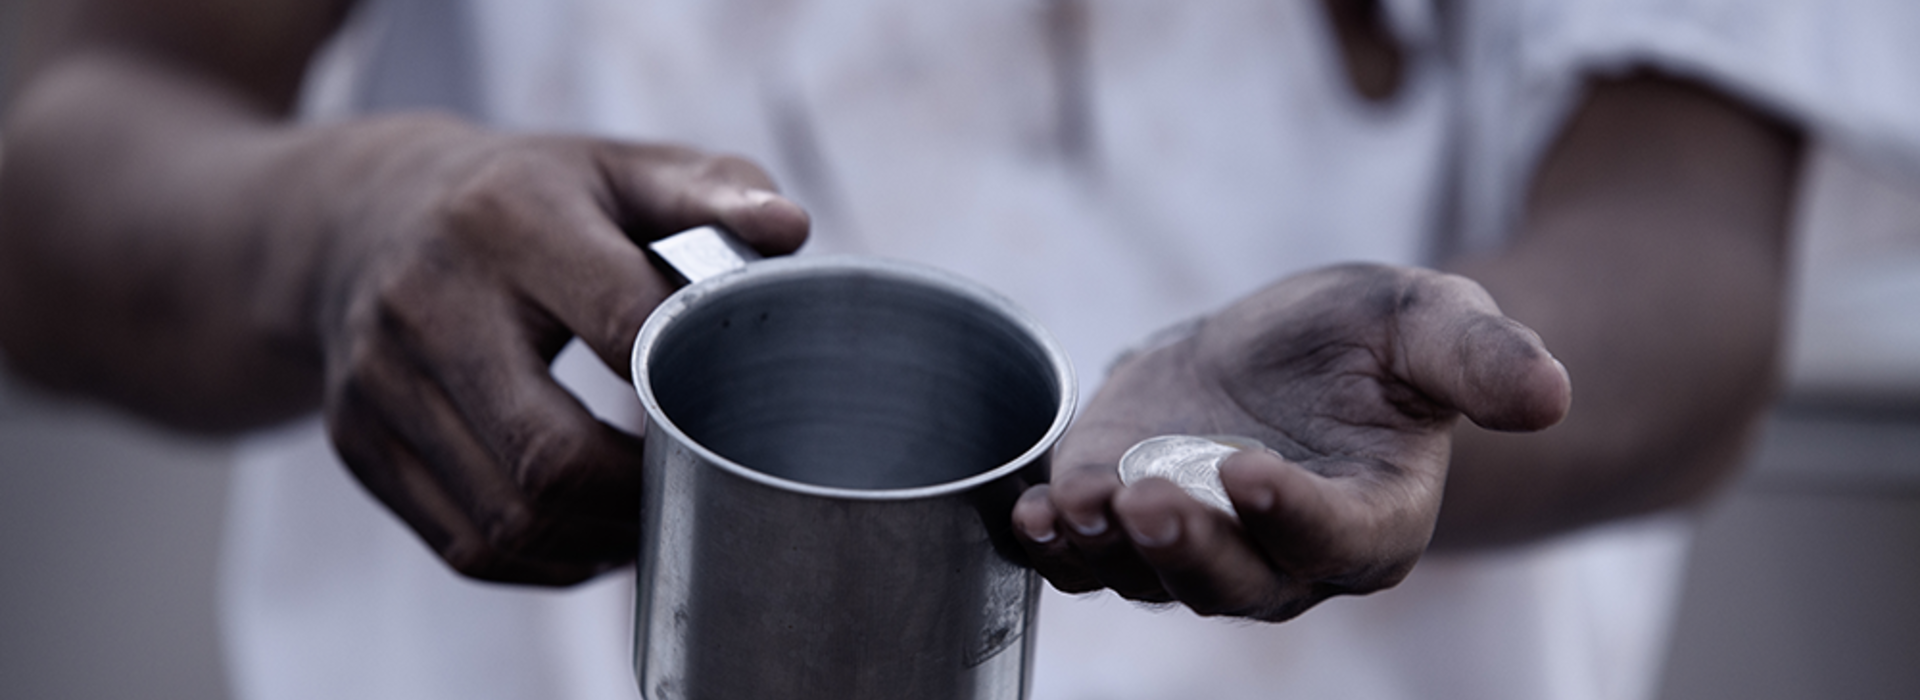 A Black man's hands holding a cup and coins.